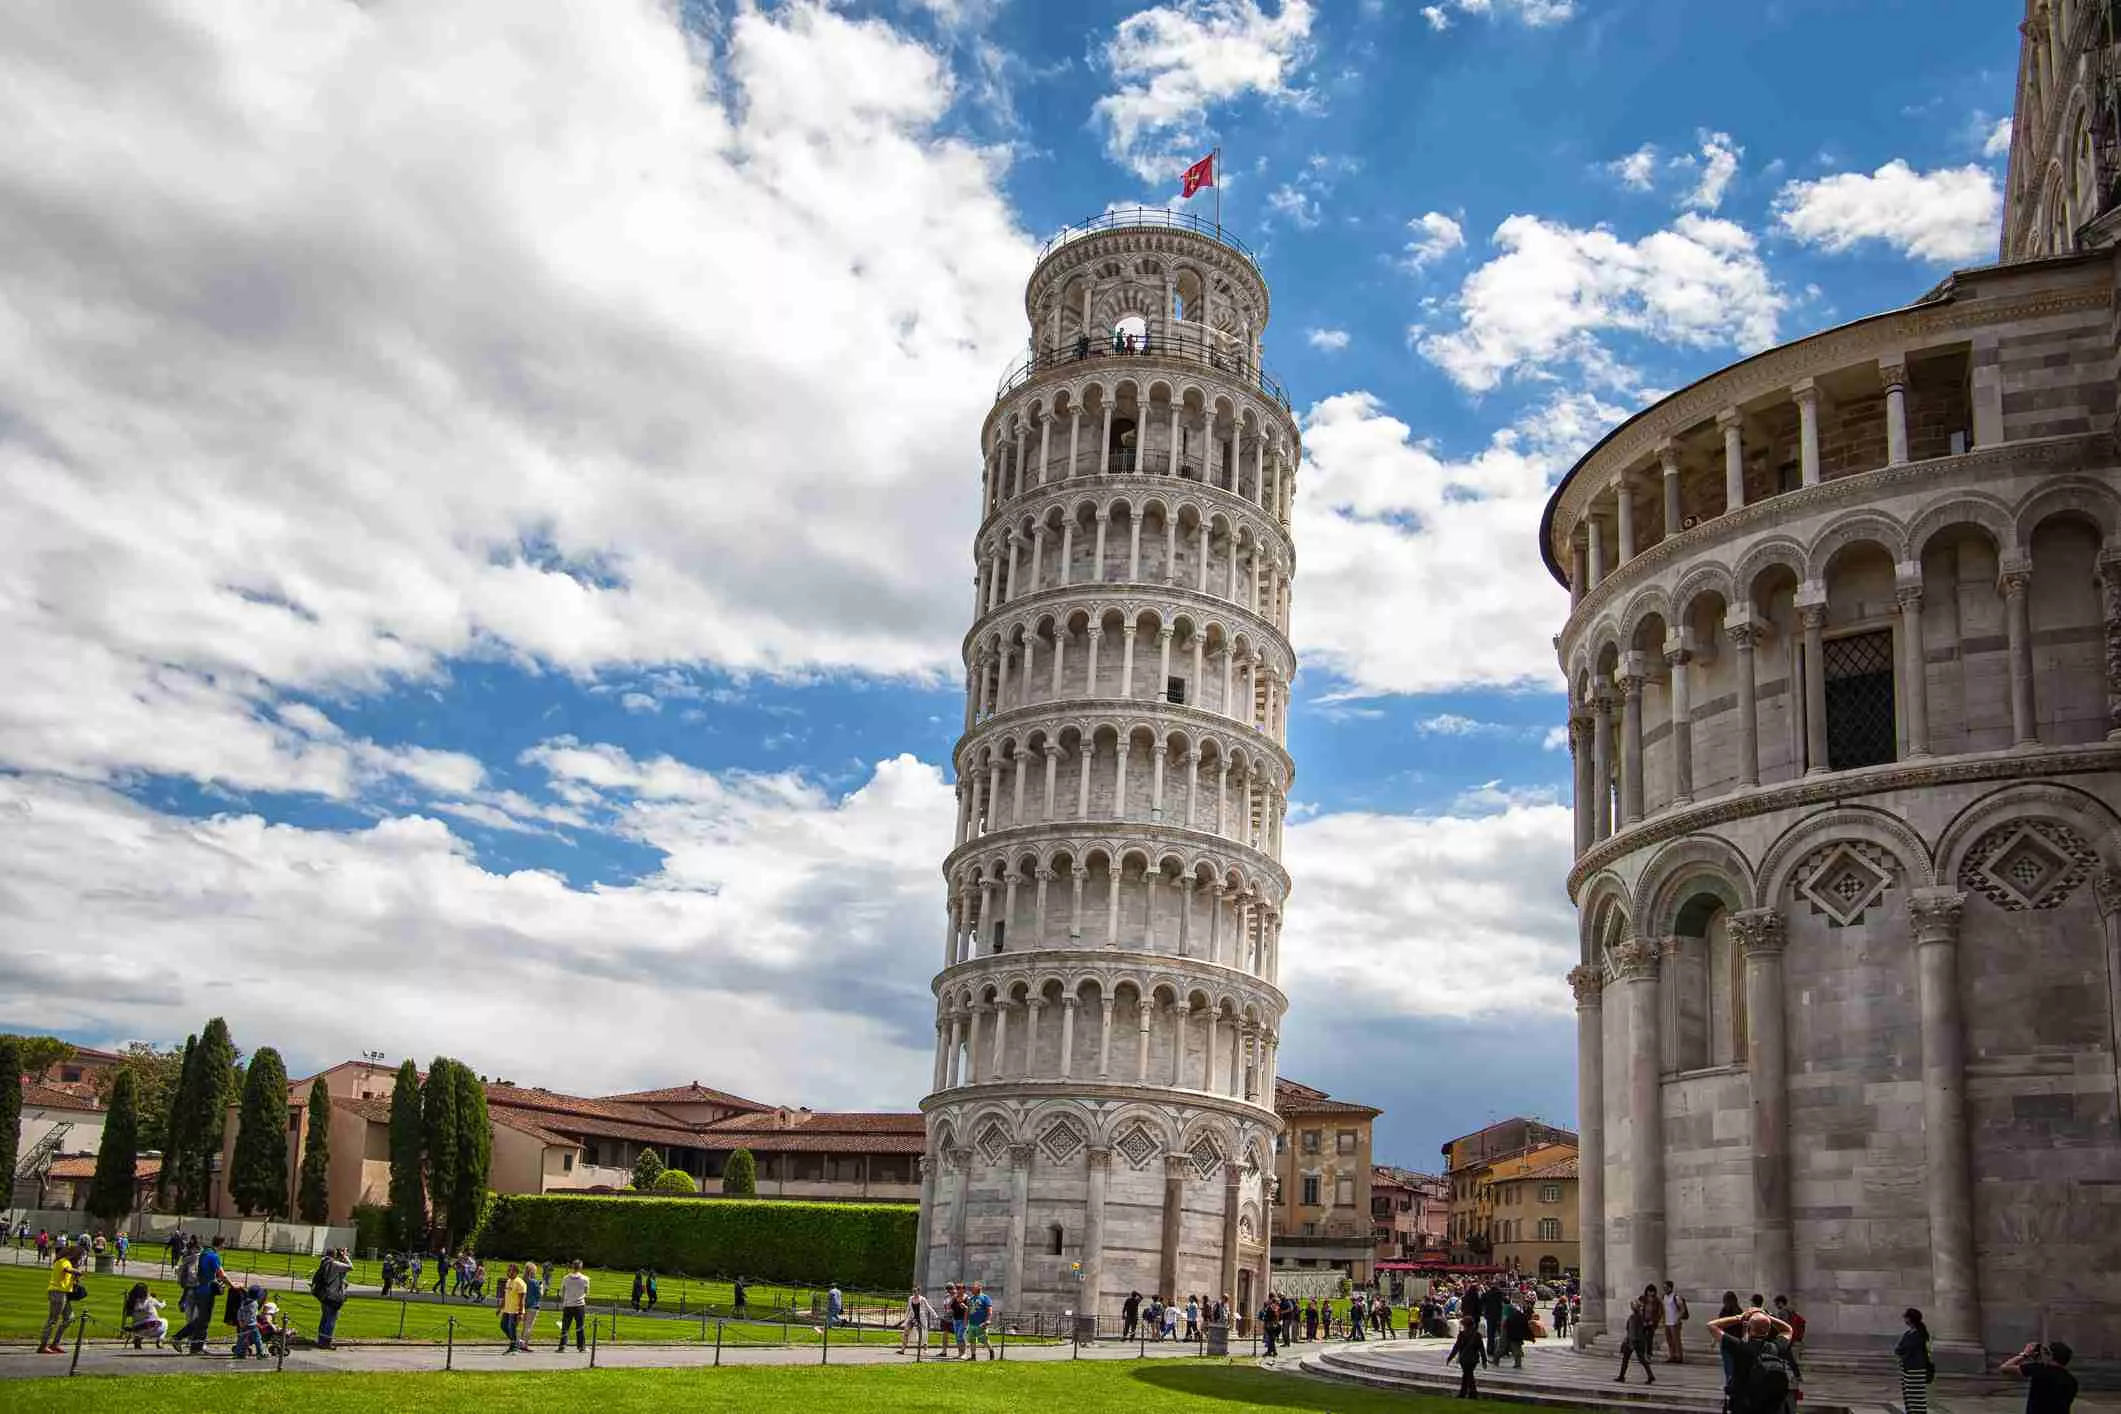 Leaning Tower of Pisa in Italy, Europe | Architecture - Rated 5.5